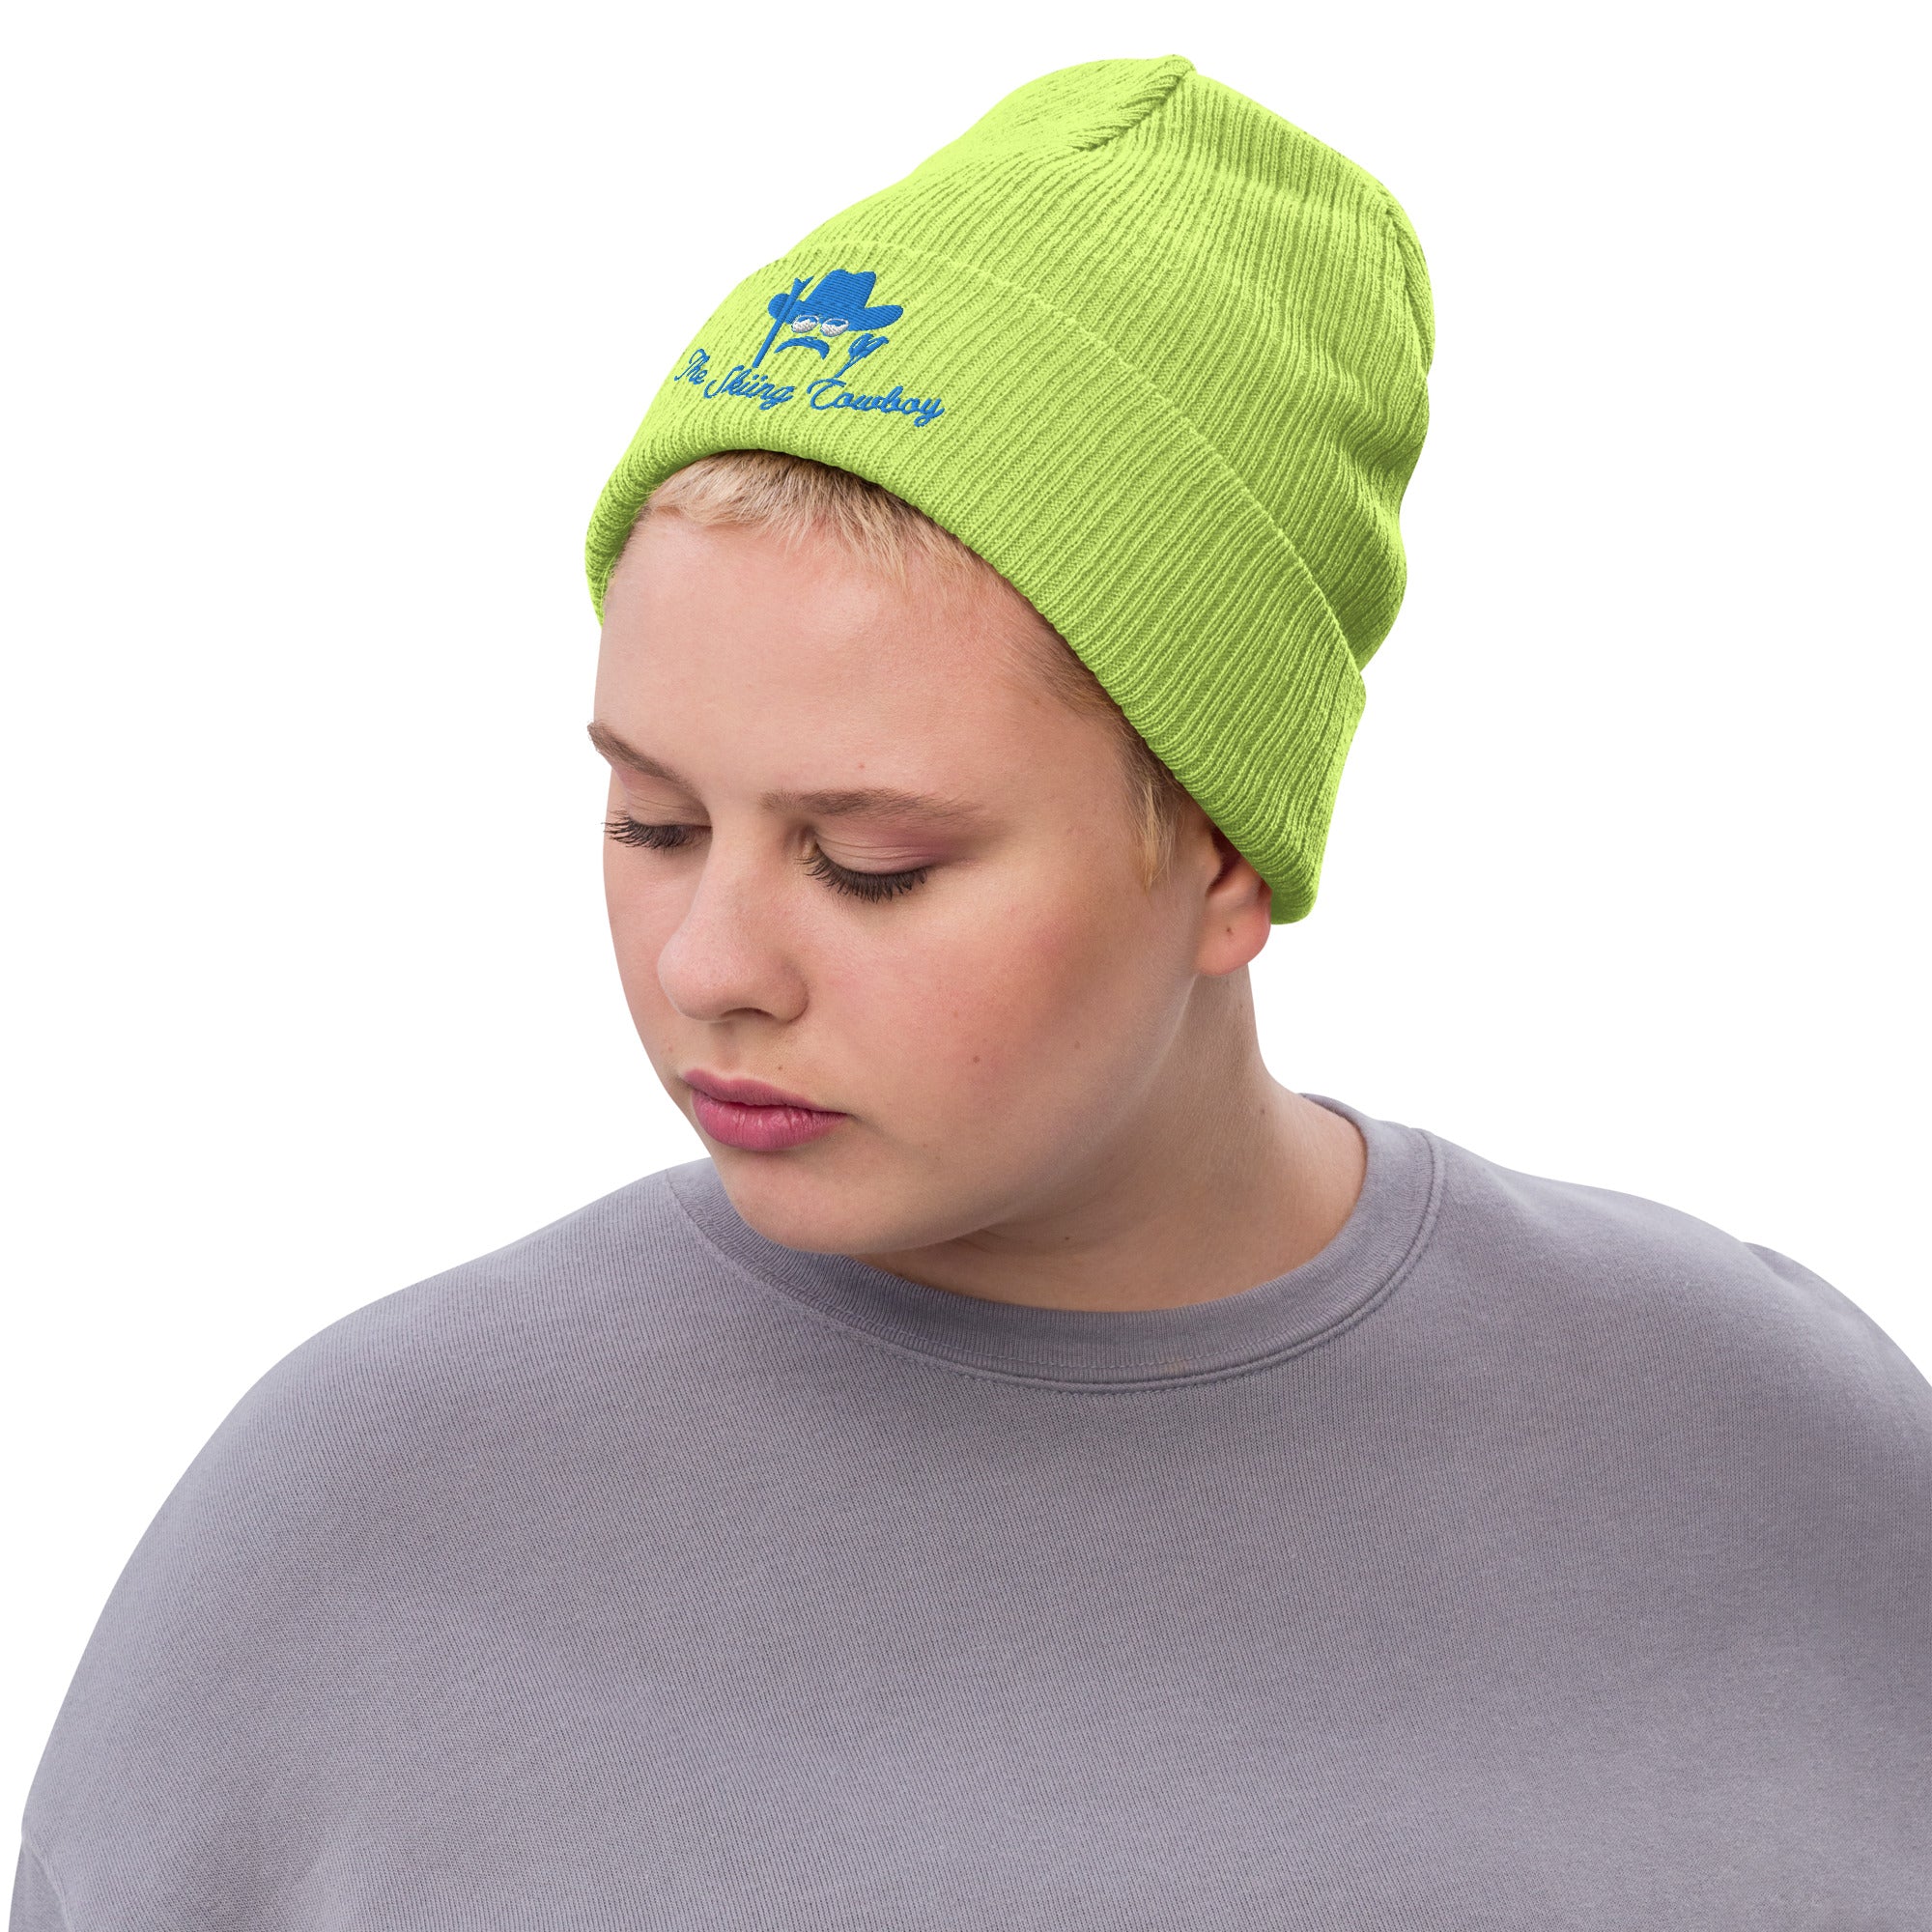 Eco ribbed knit beanie The Skiing Cowboy Blue